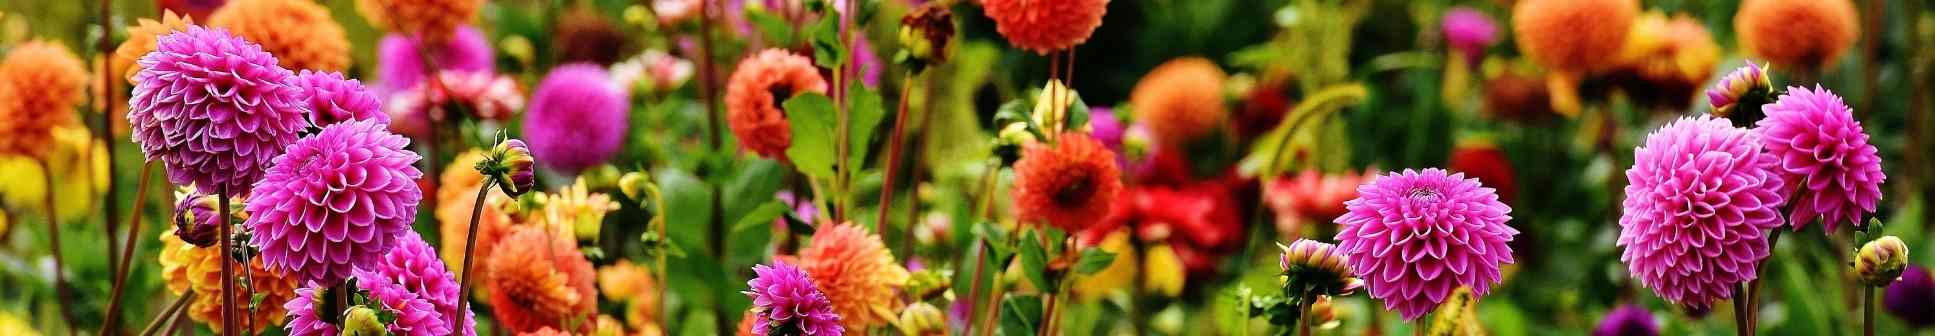 How to Grow Dahlias for a Stunning Summer Display | The Seed Collection